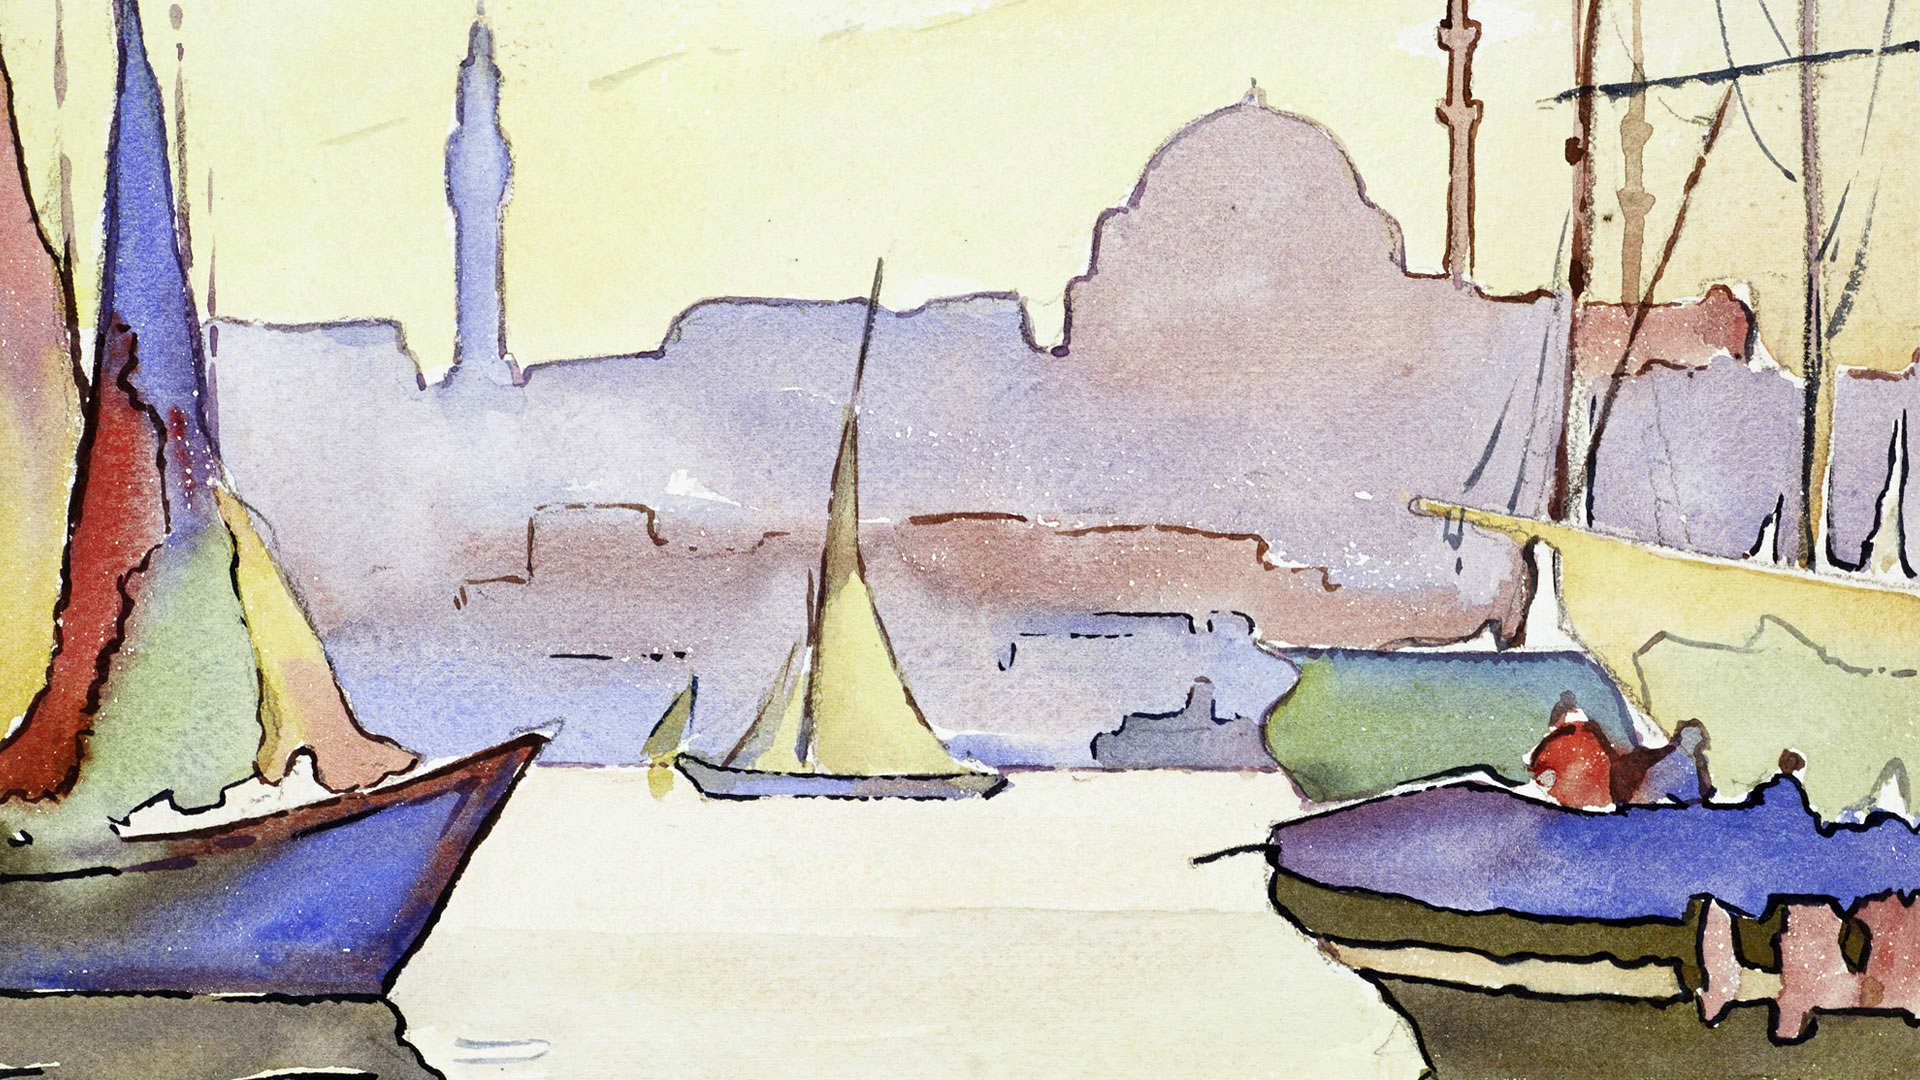 Watercolor painting of a sunset scene with sailboats